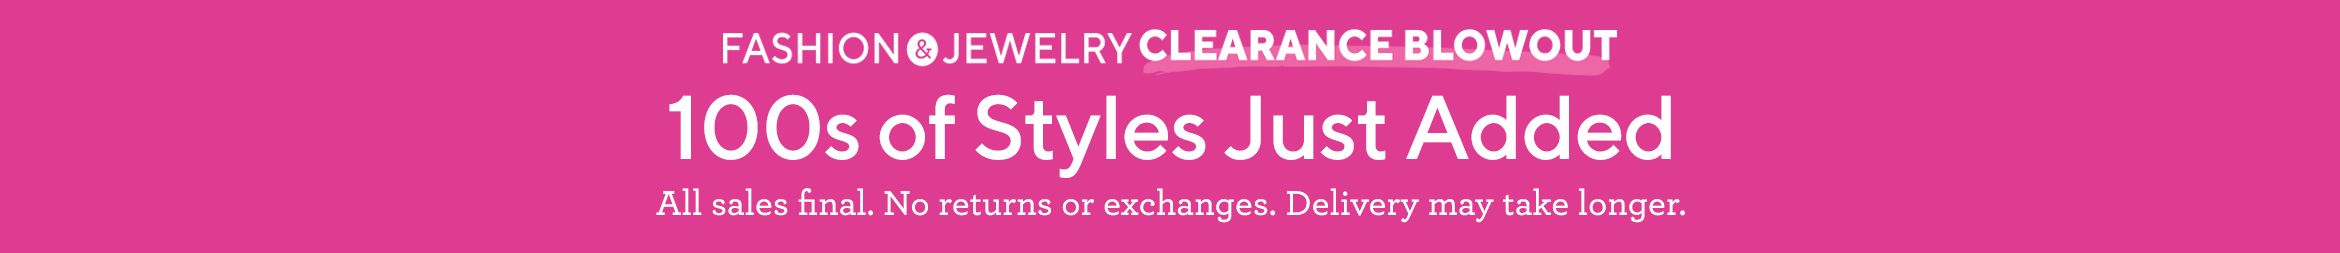 Fashion & Jewelry Clearance Blowout. 100s of Styles Just Added. All sales final. No returns or exchanges. Delivery may take longer.